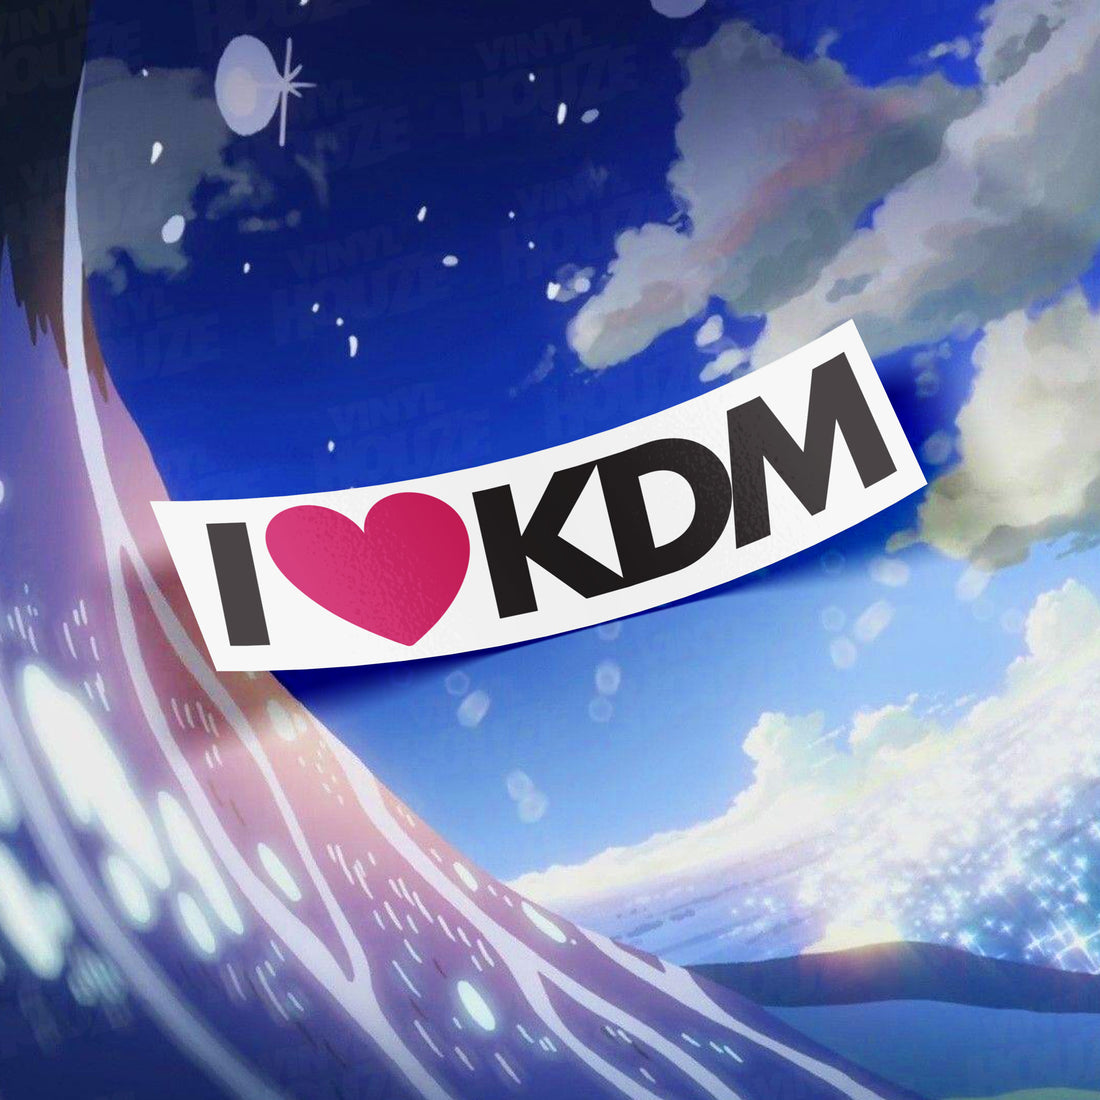 Newest KDM stickers availalble now on our store collection!